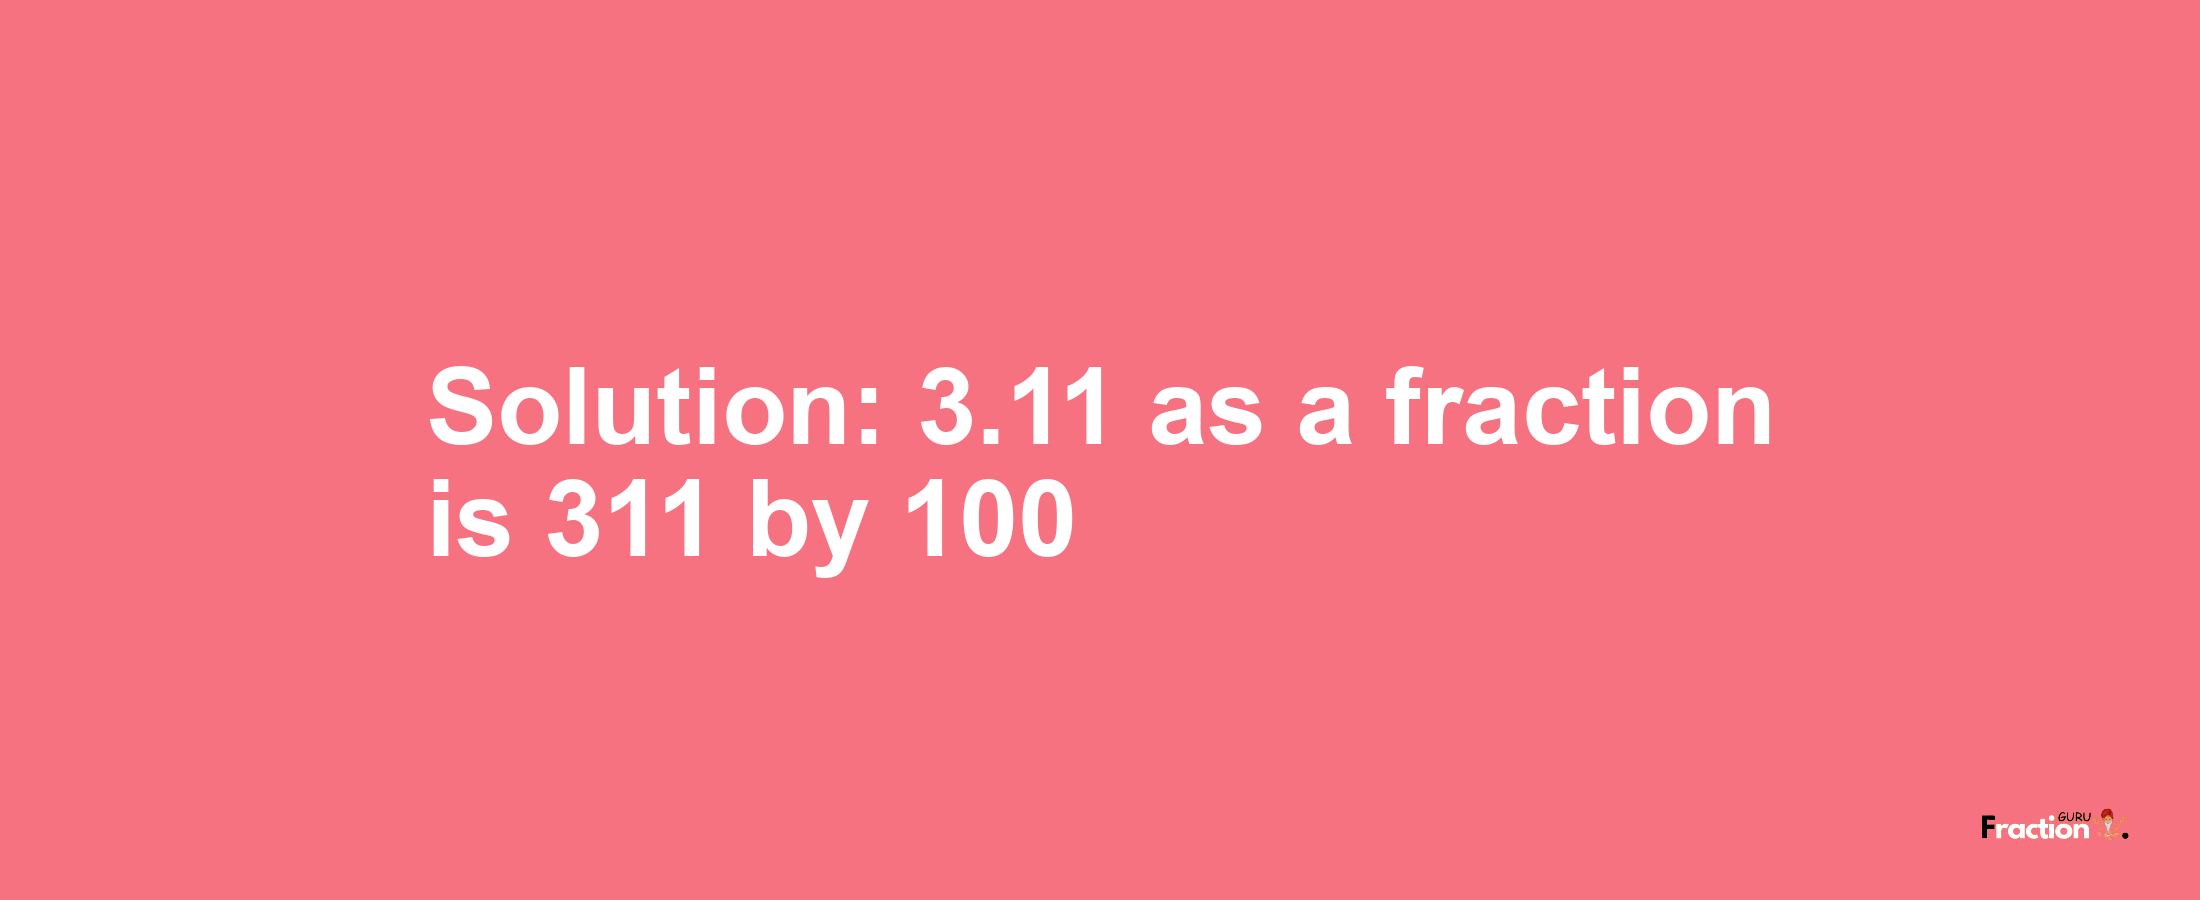 Solution:3.11 as a fraction is 311/100